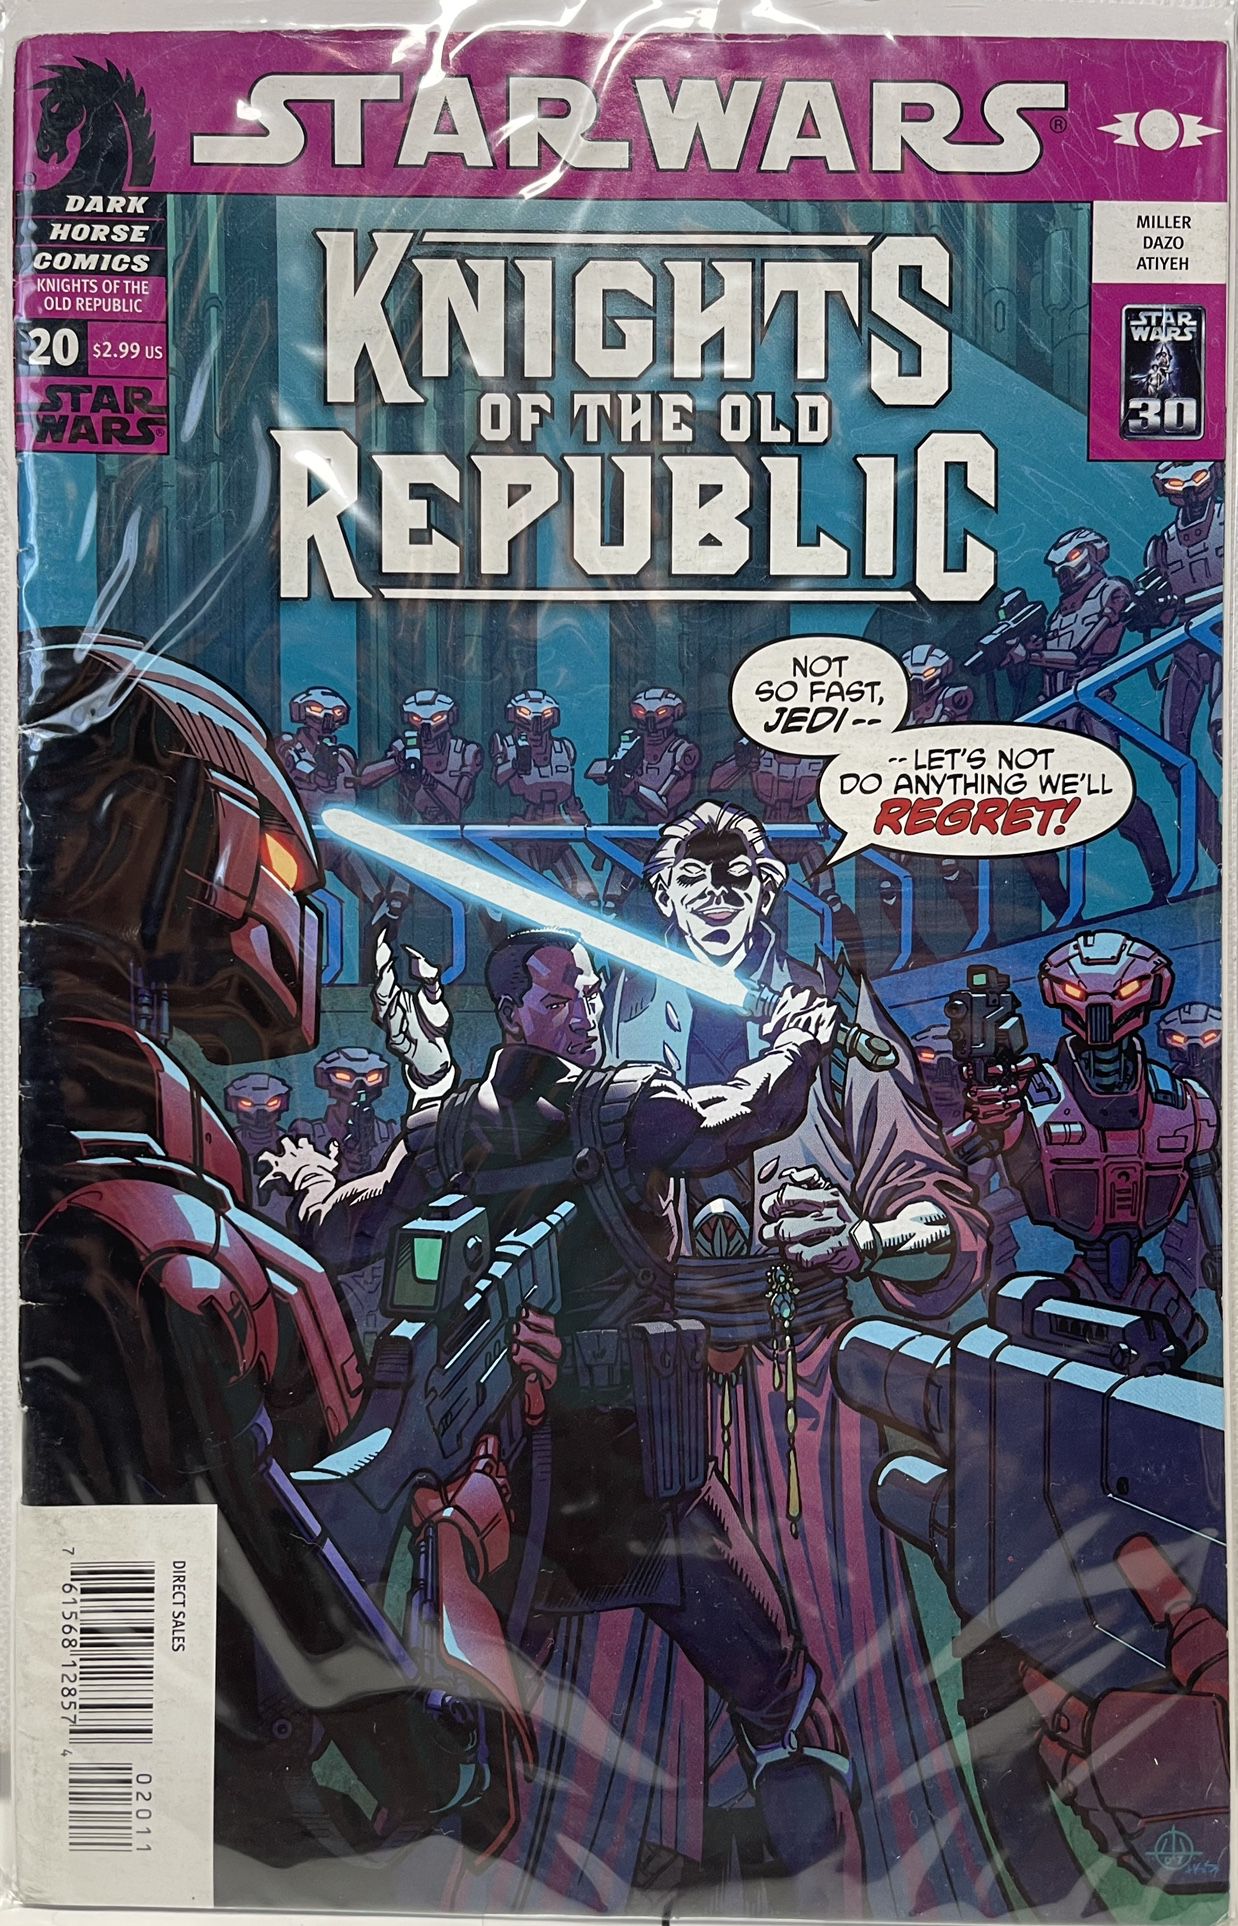 STAR WARS: Knights Of The Old Republic COMIC BOOK